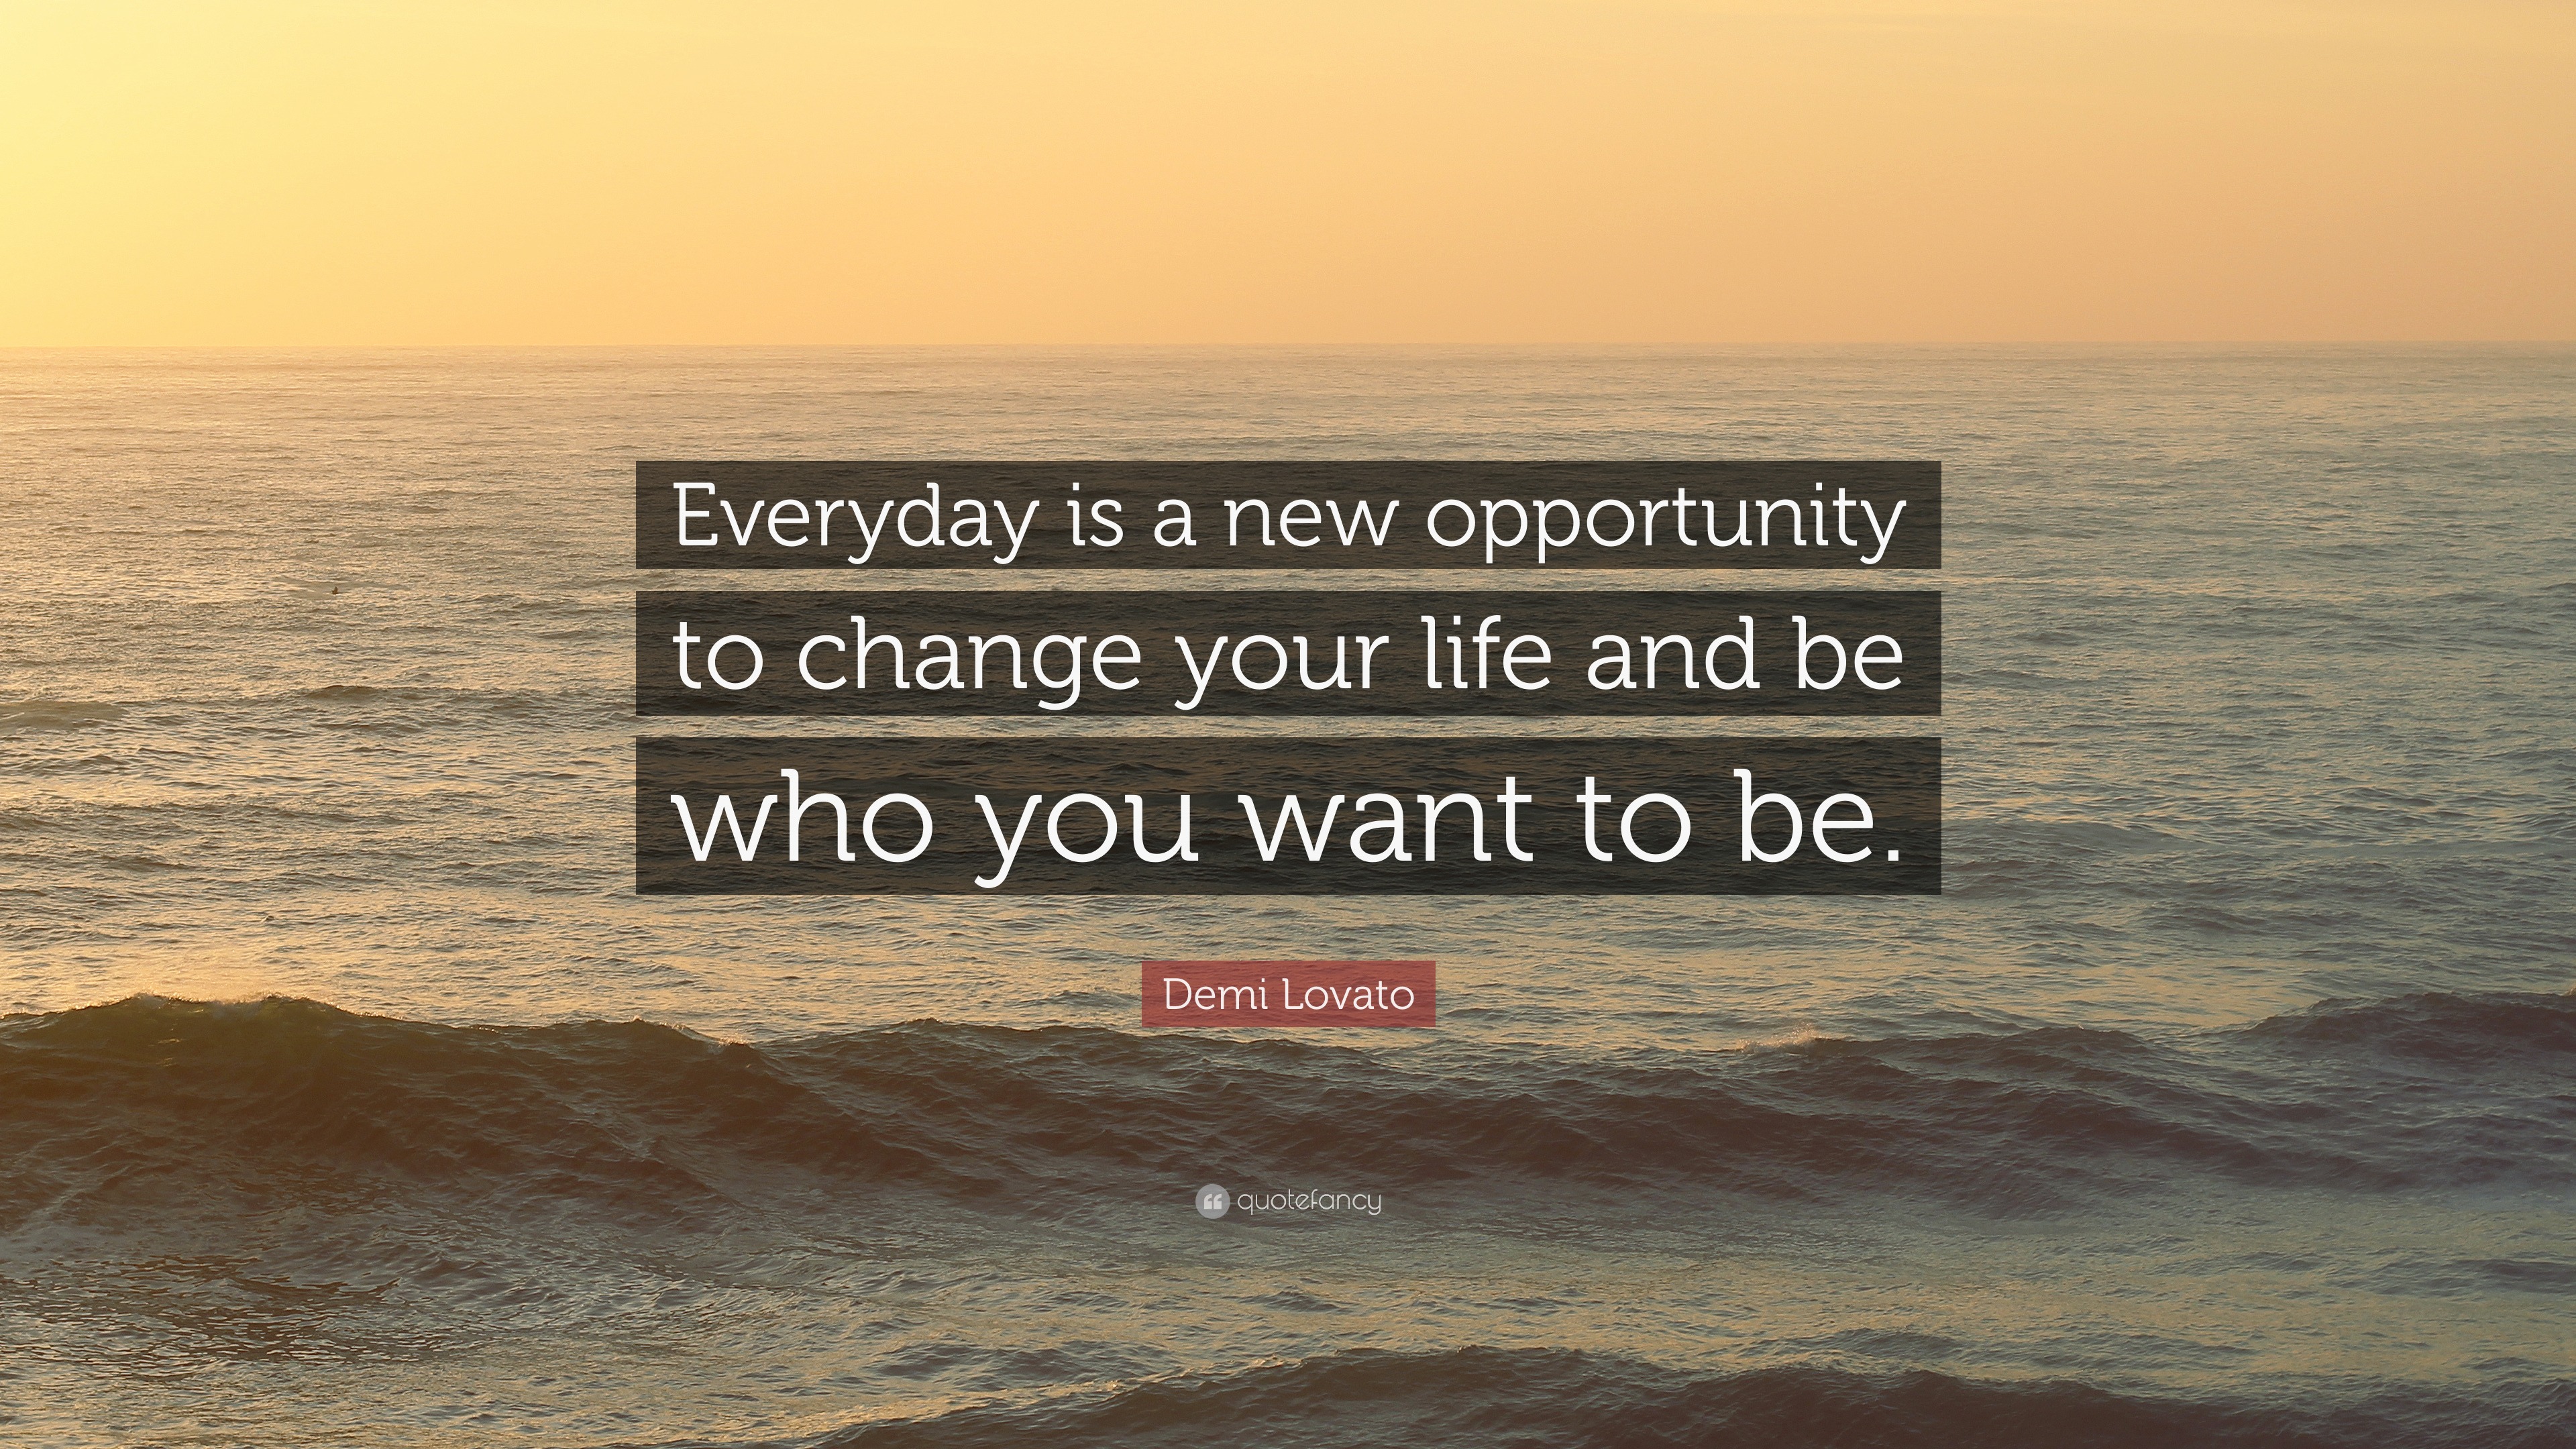 Demi Lovato Quote  Everyday is a new opportunity to 